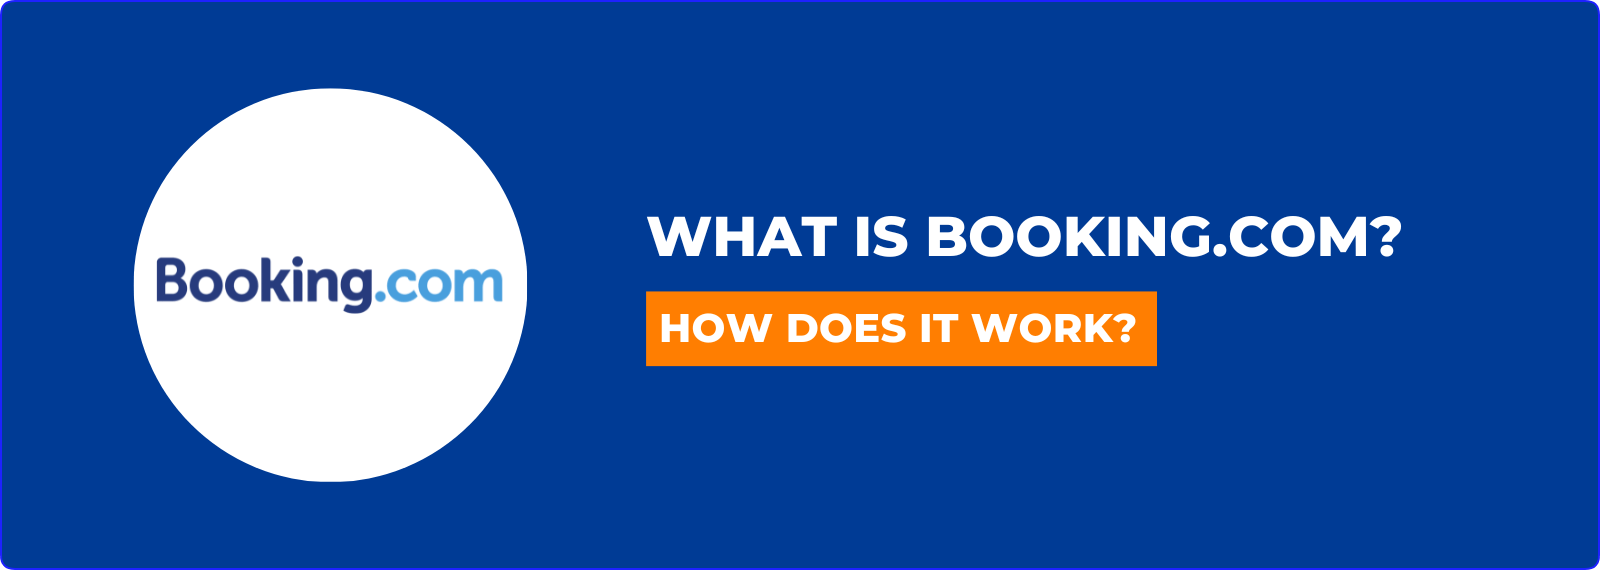 what is Booking.com and how does it work